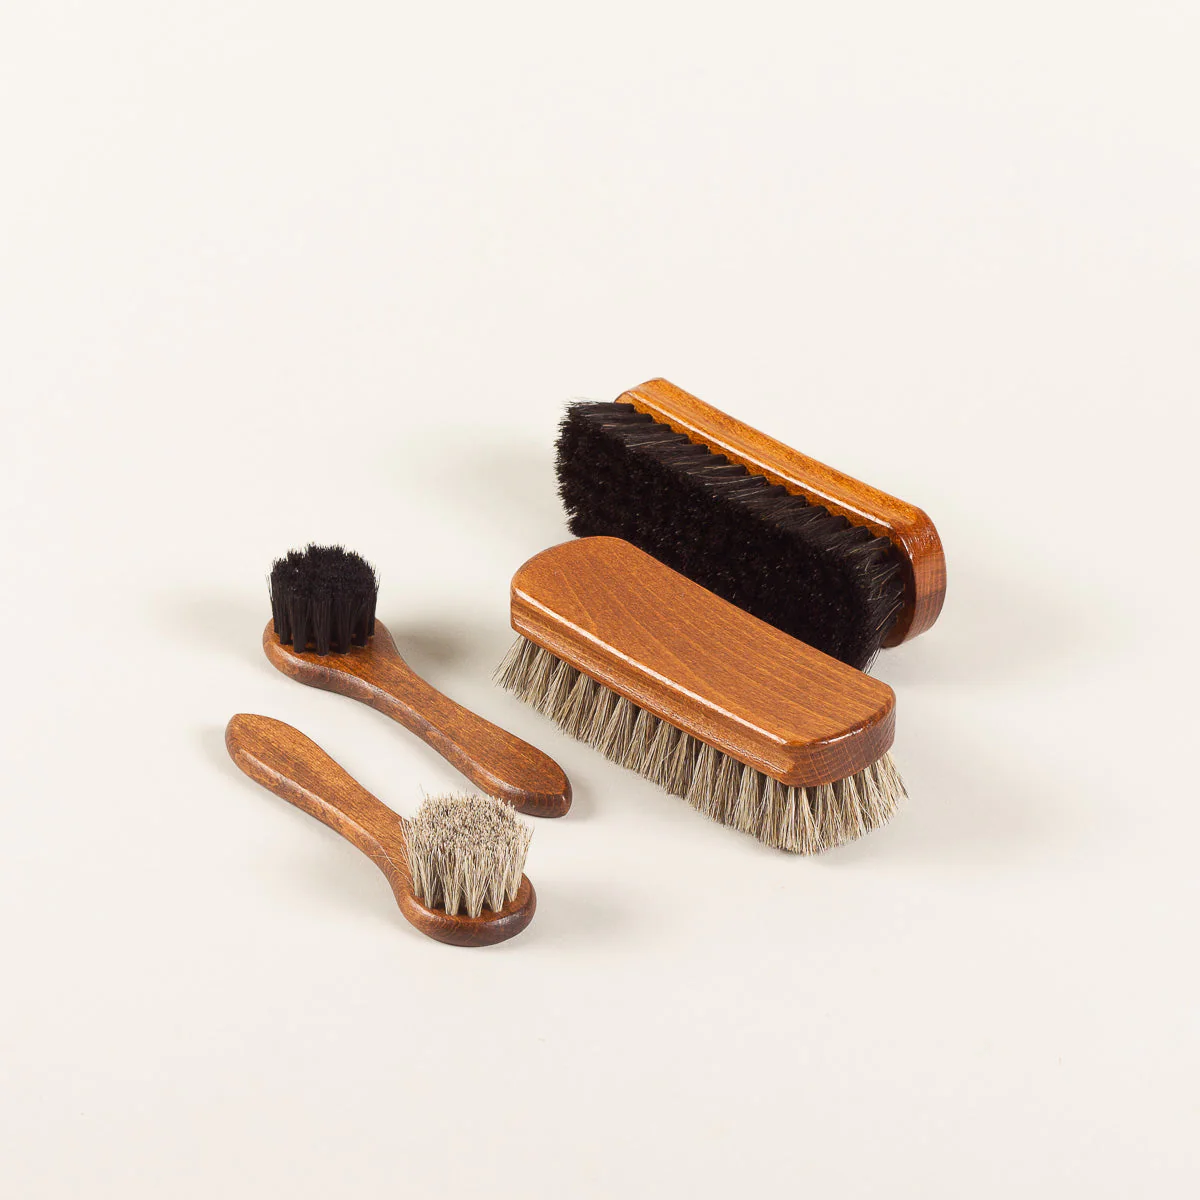 How To Clean A Horsehair Brush